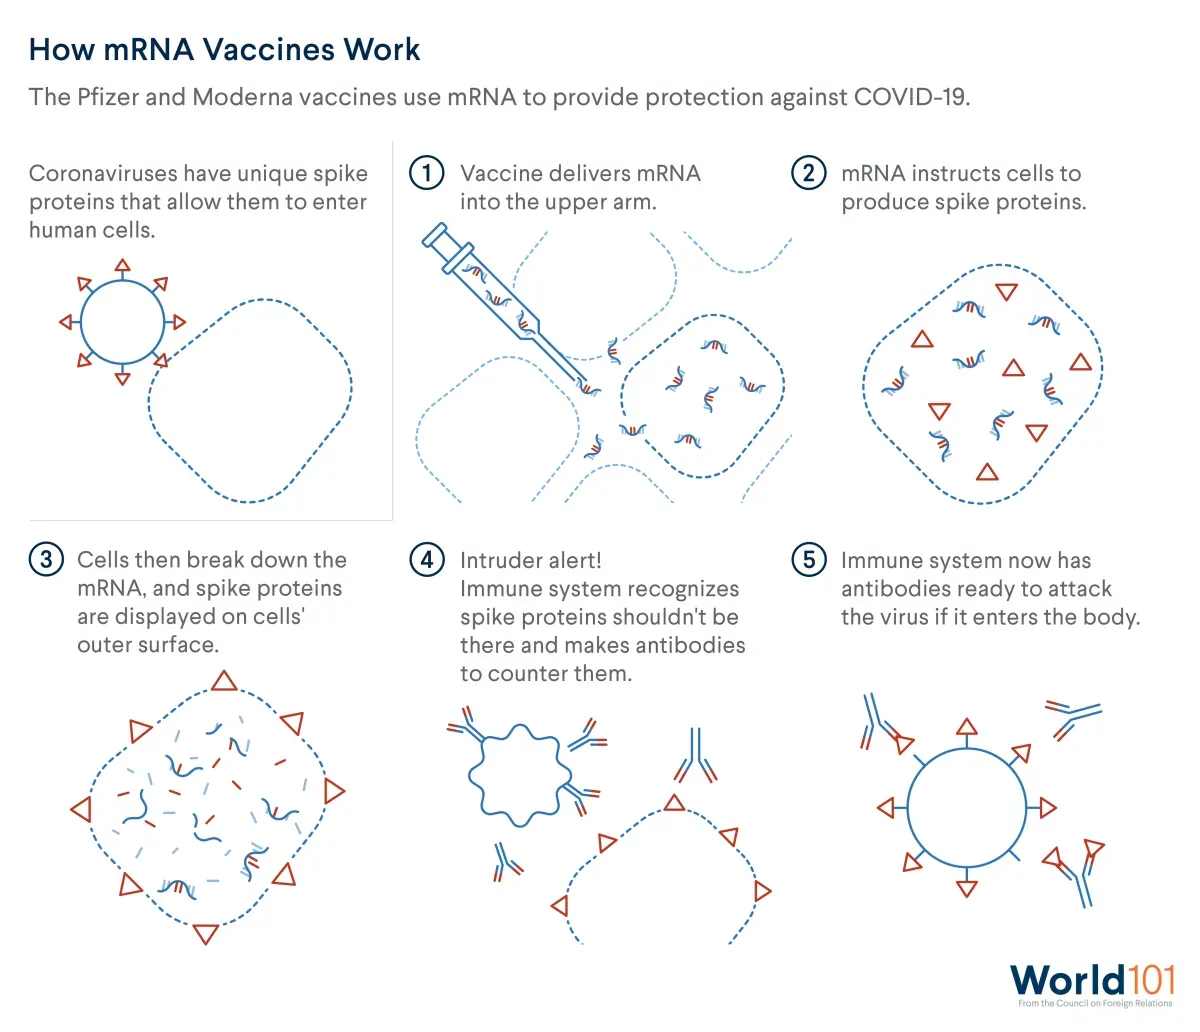 Graphic showing how the Pfizer and Moderna vaccines use mRNA to provide protection against COVID-19. For more info contact us at world101@cfr.org.